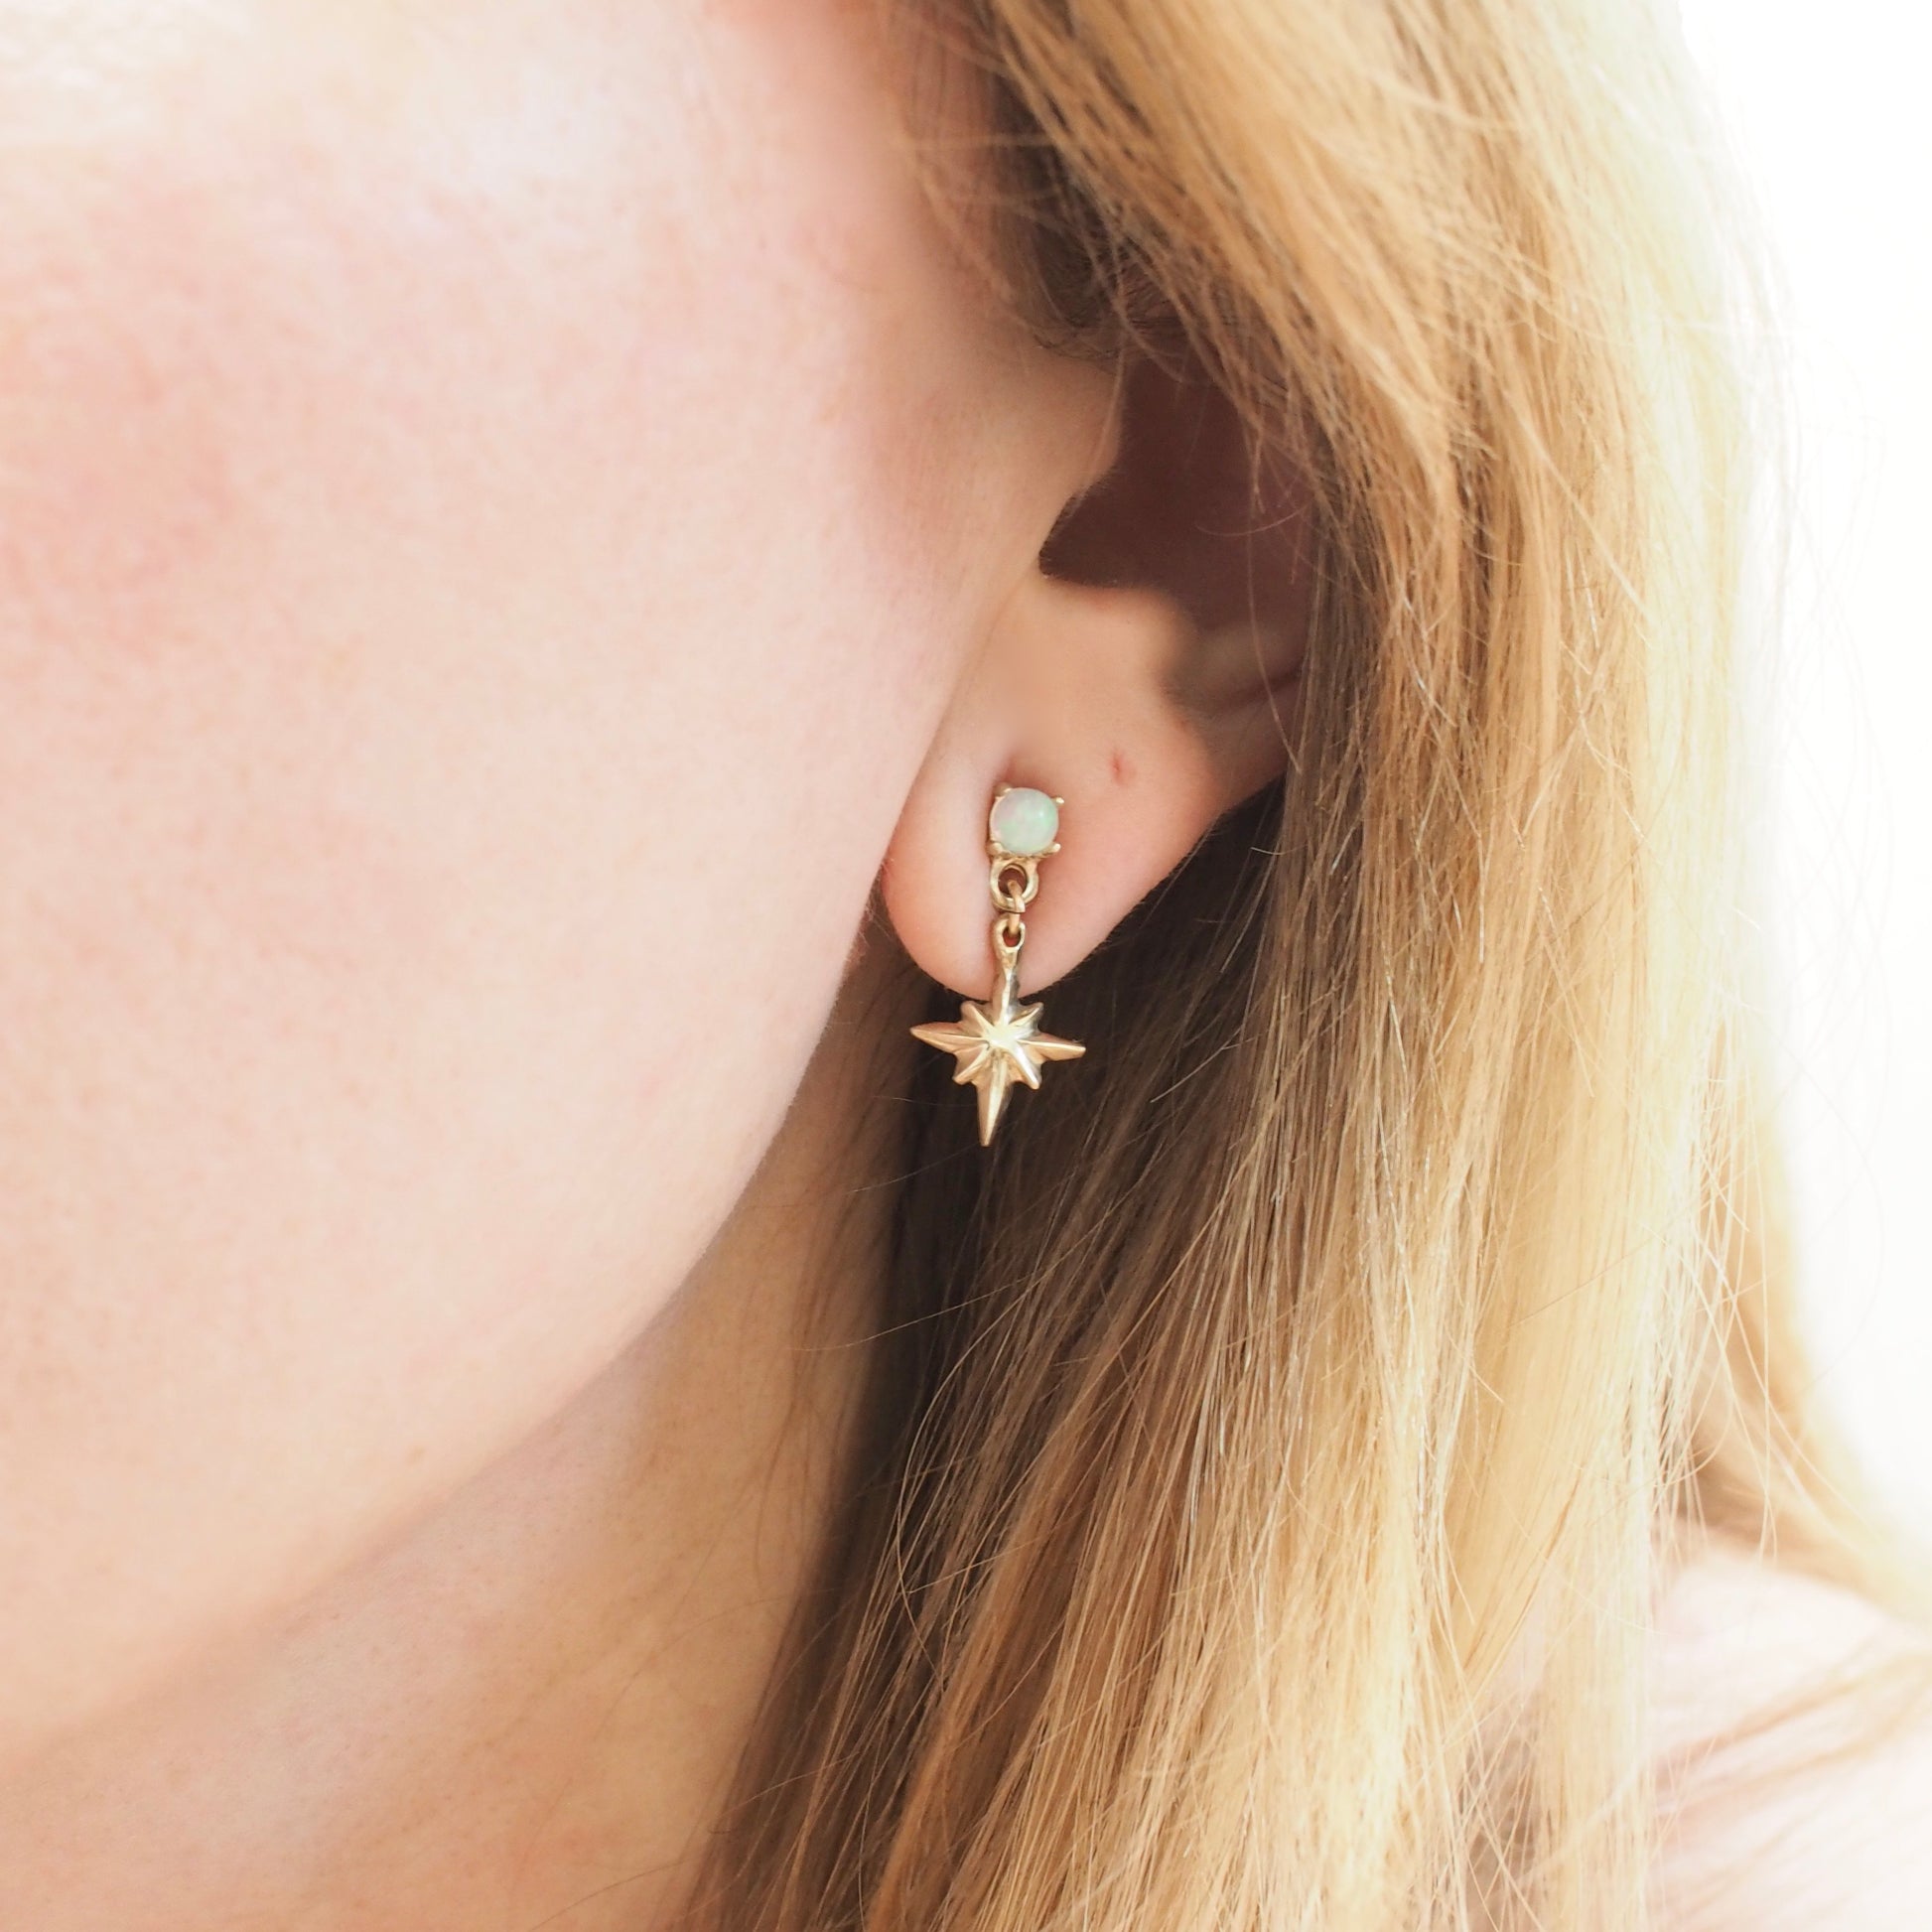 Tiny dangly star earrings set with 4mm sustainably sourced opals, in Gold Tone bronze. Made by Iron Oxide Designs and shown on a model for scale